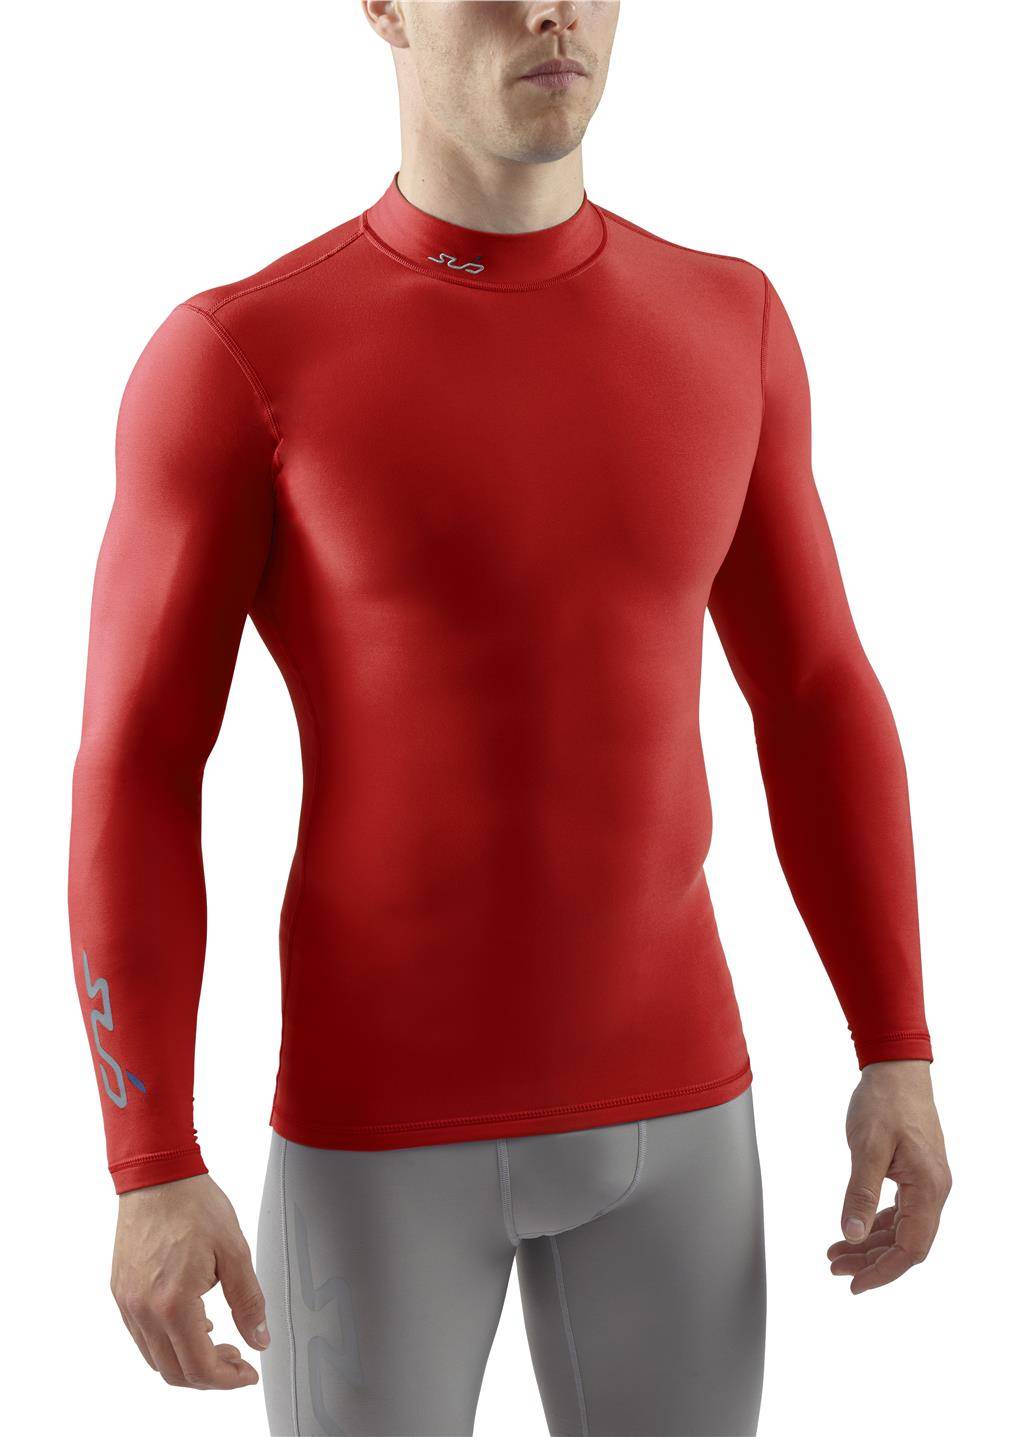 Колд мен. RBX Performance Baselayer Termal Top large. Men's Tactical Military Base layer Thermal Compression shorts.